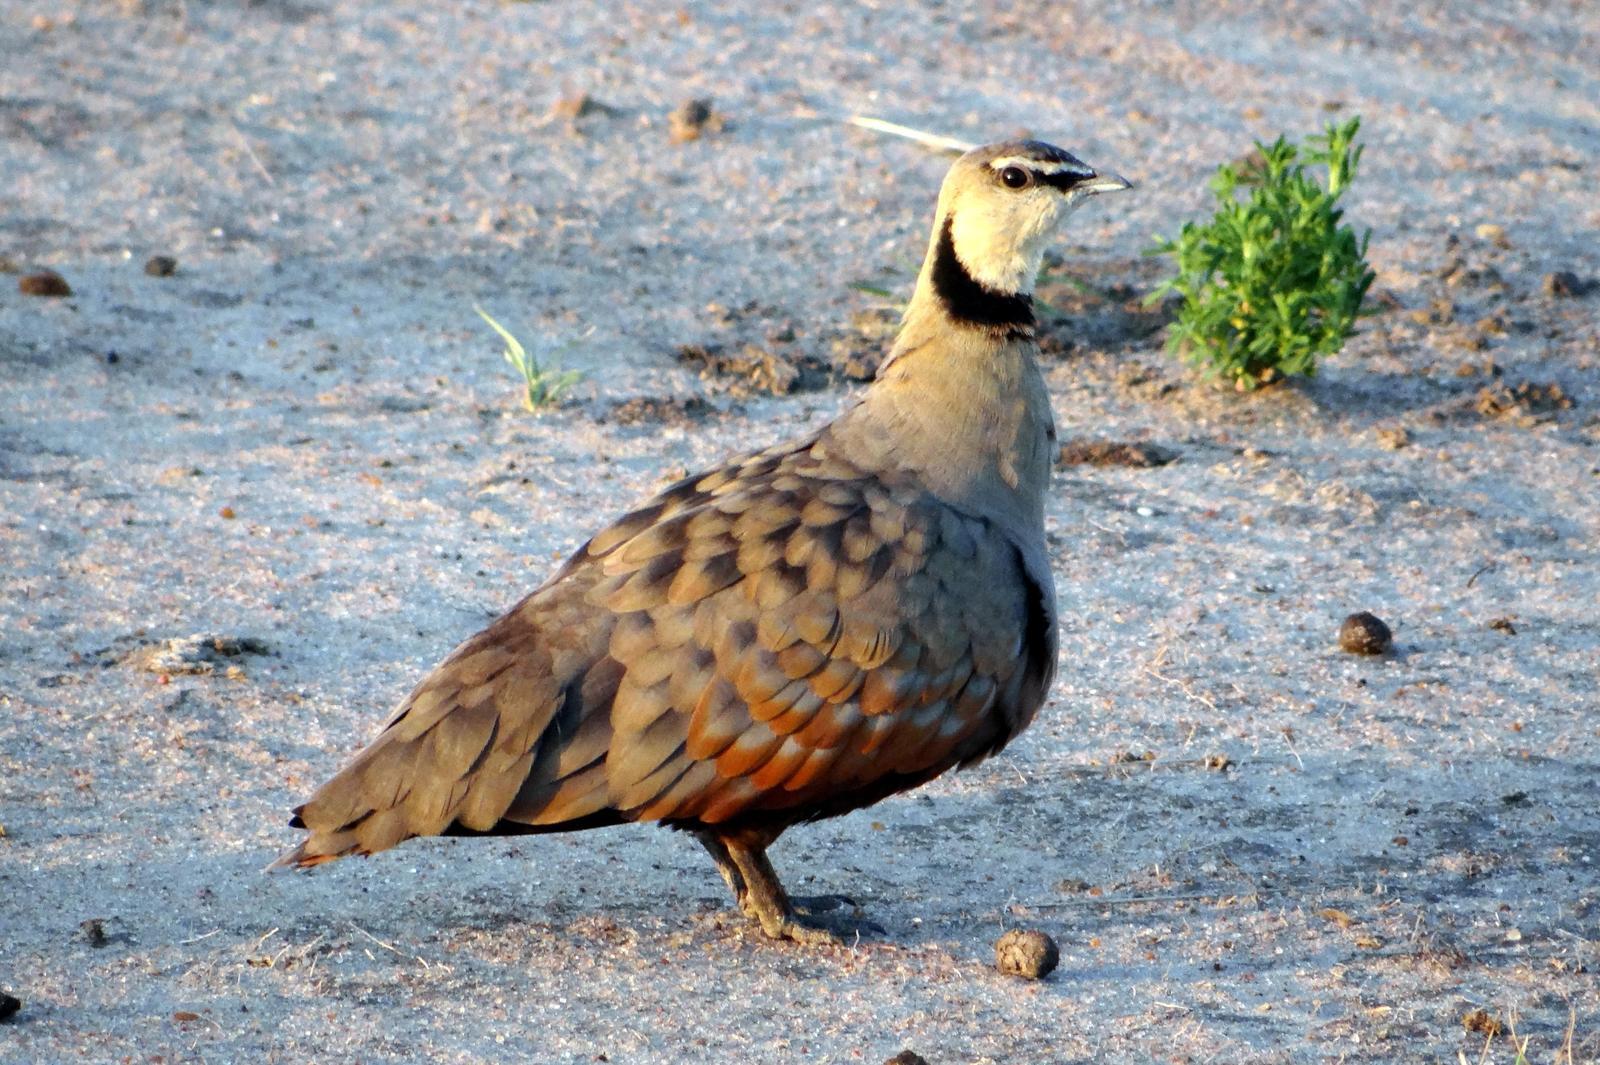 Yellow-throated Sandgrouse Photo by Todd A. Watkins